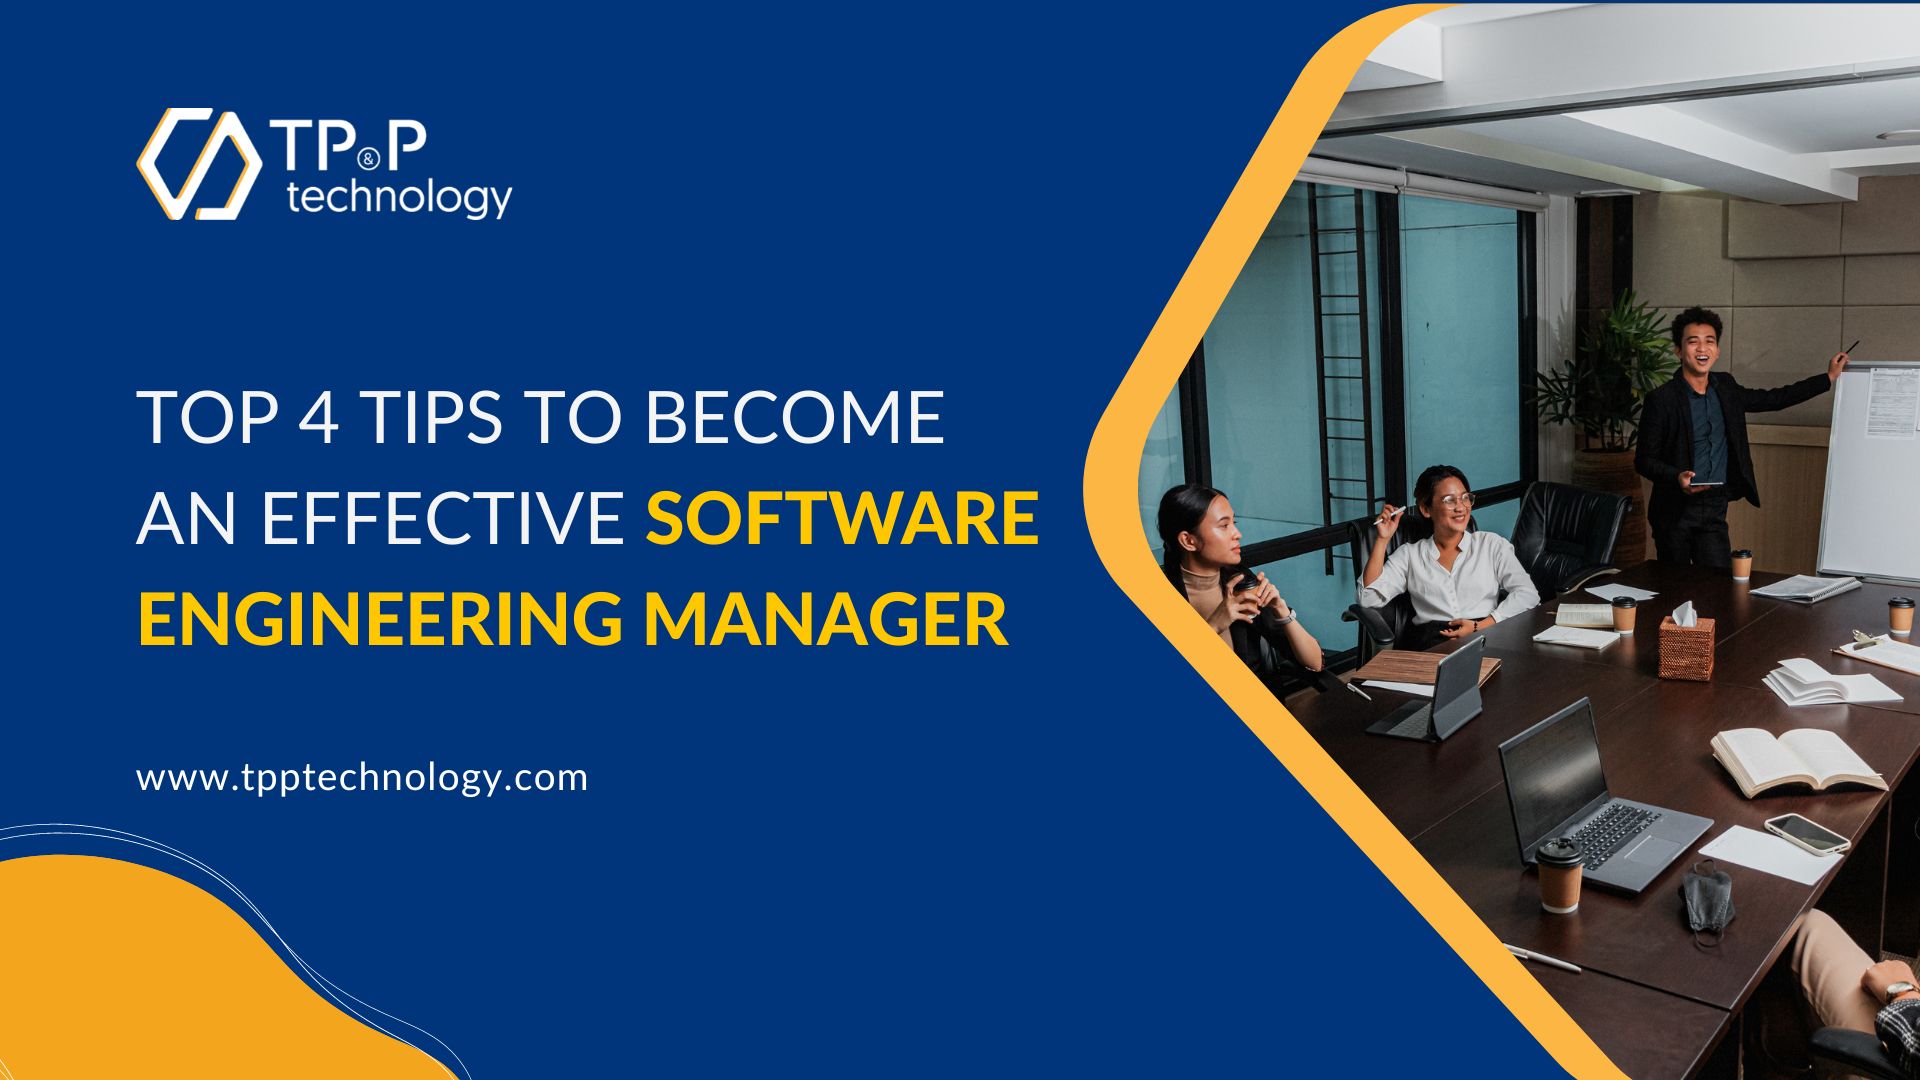 Top 4 Tips To Become An Effective Software Engineering Manager